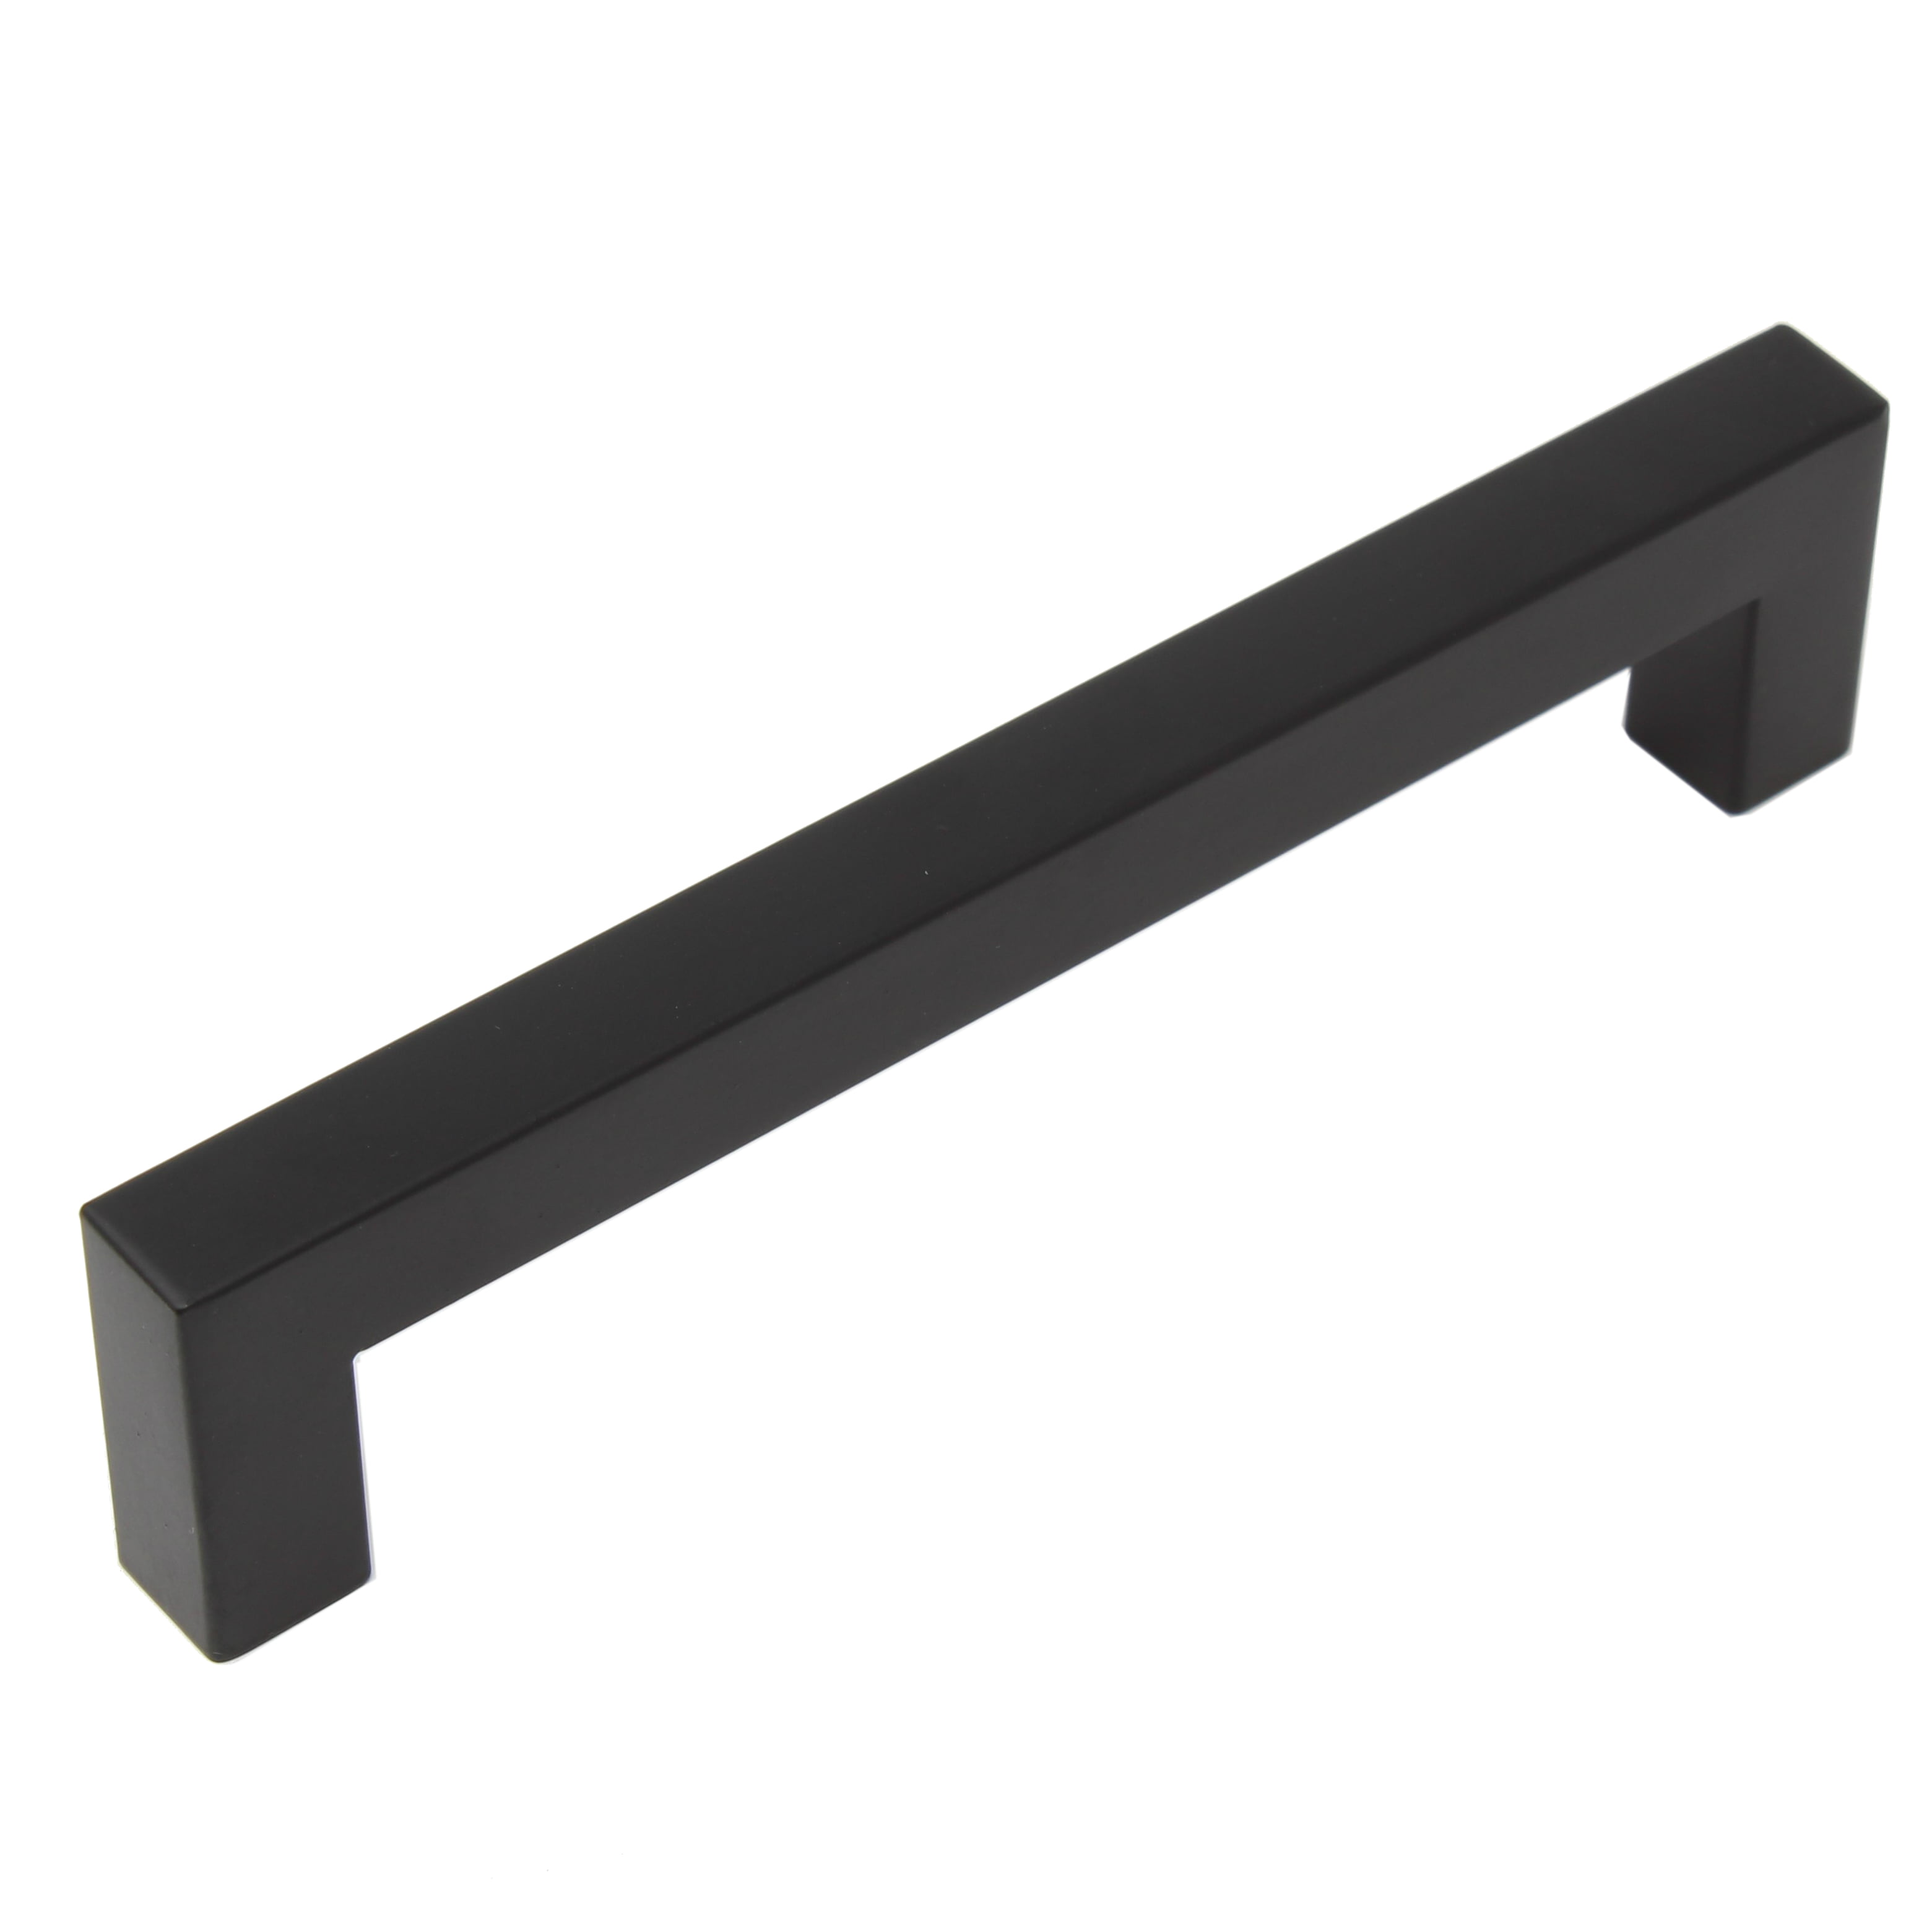 Flat Black Square Bar Cabinet Pulls: 5" Hole Center (128mm) | Modern Black Stainless Steel Cabinet Knobs And Pulls